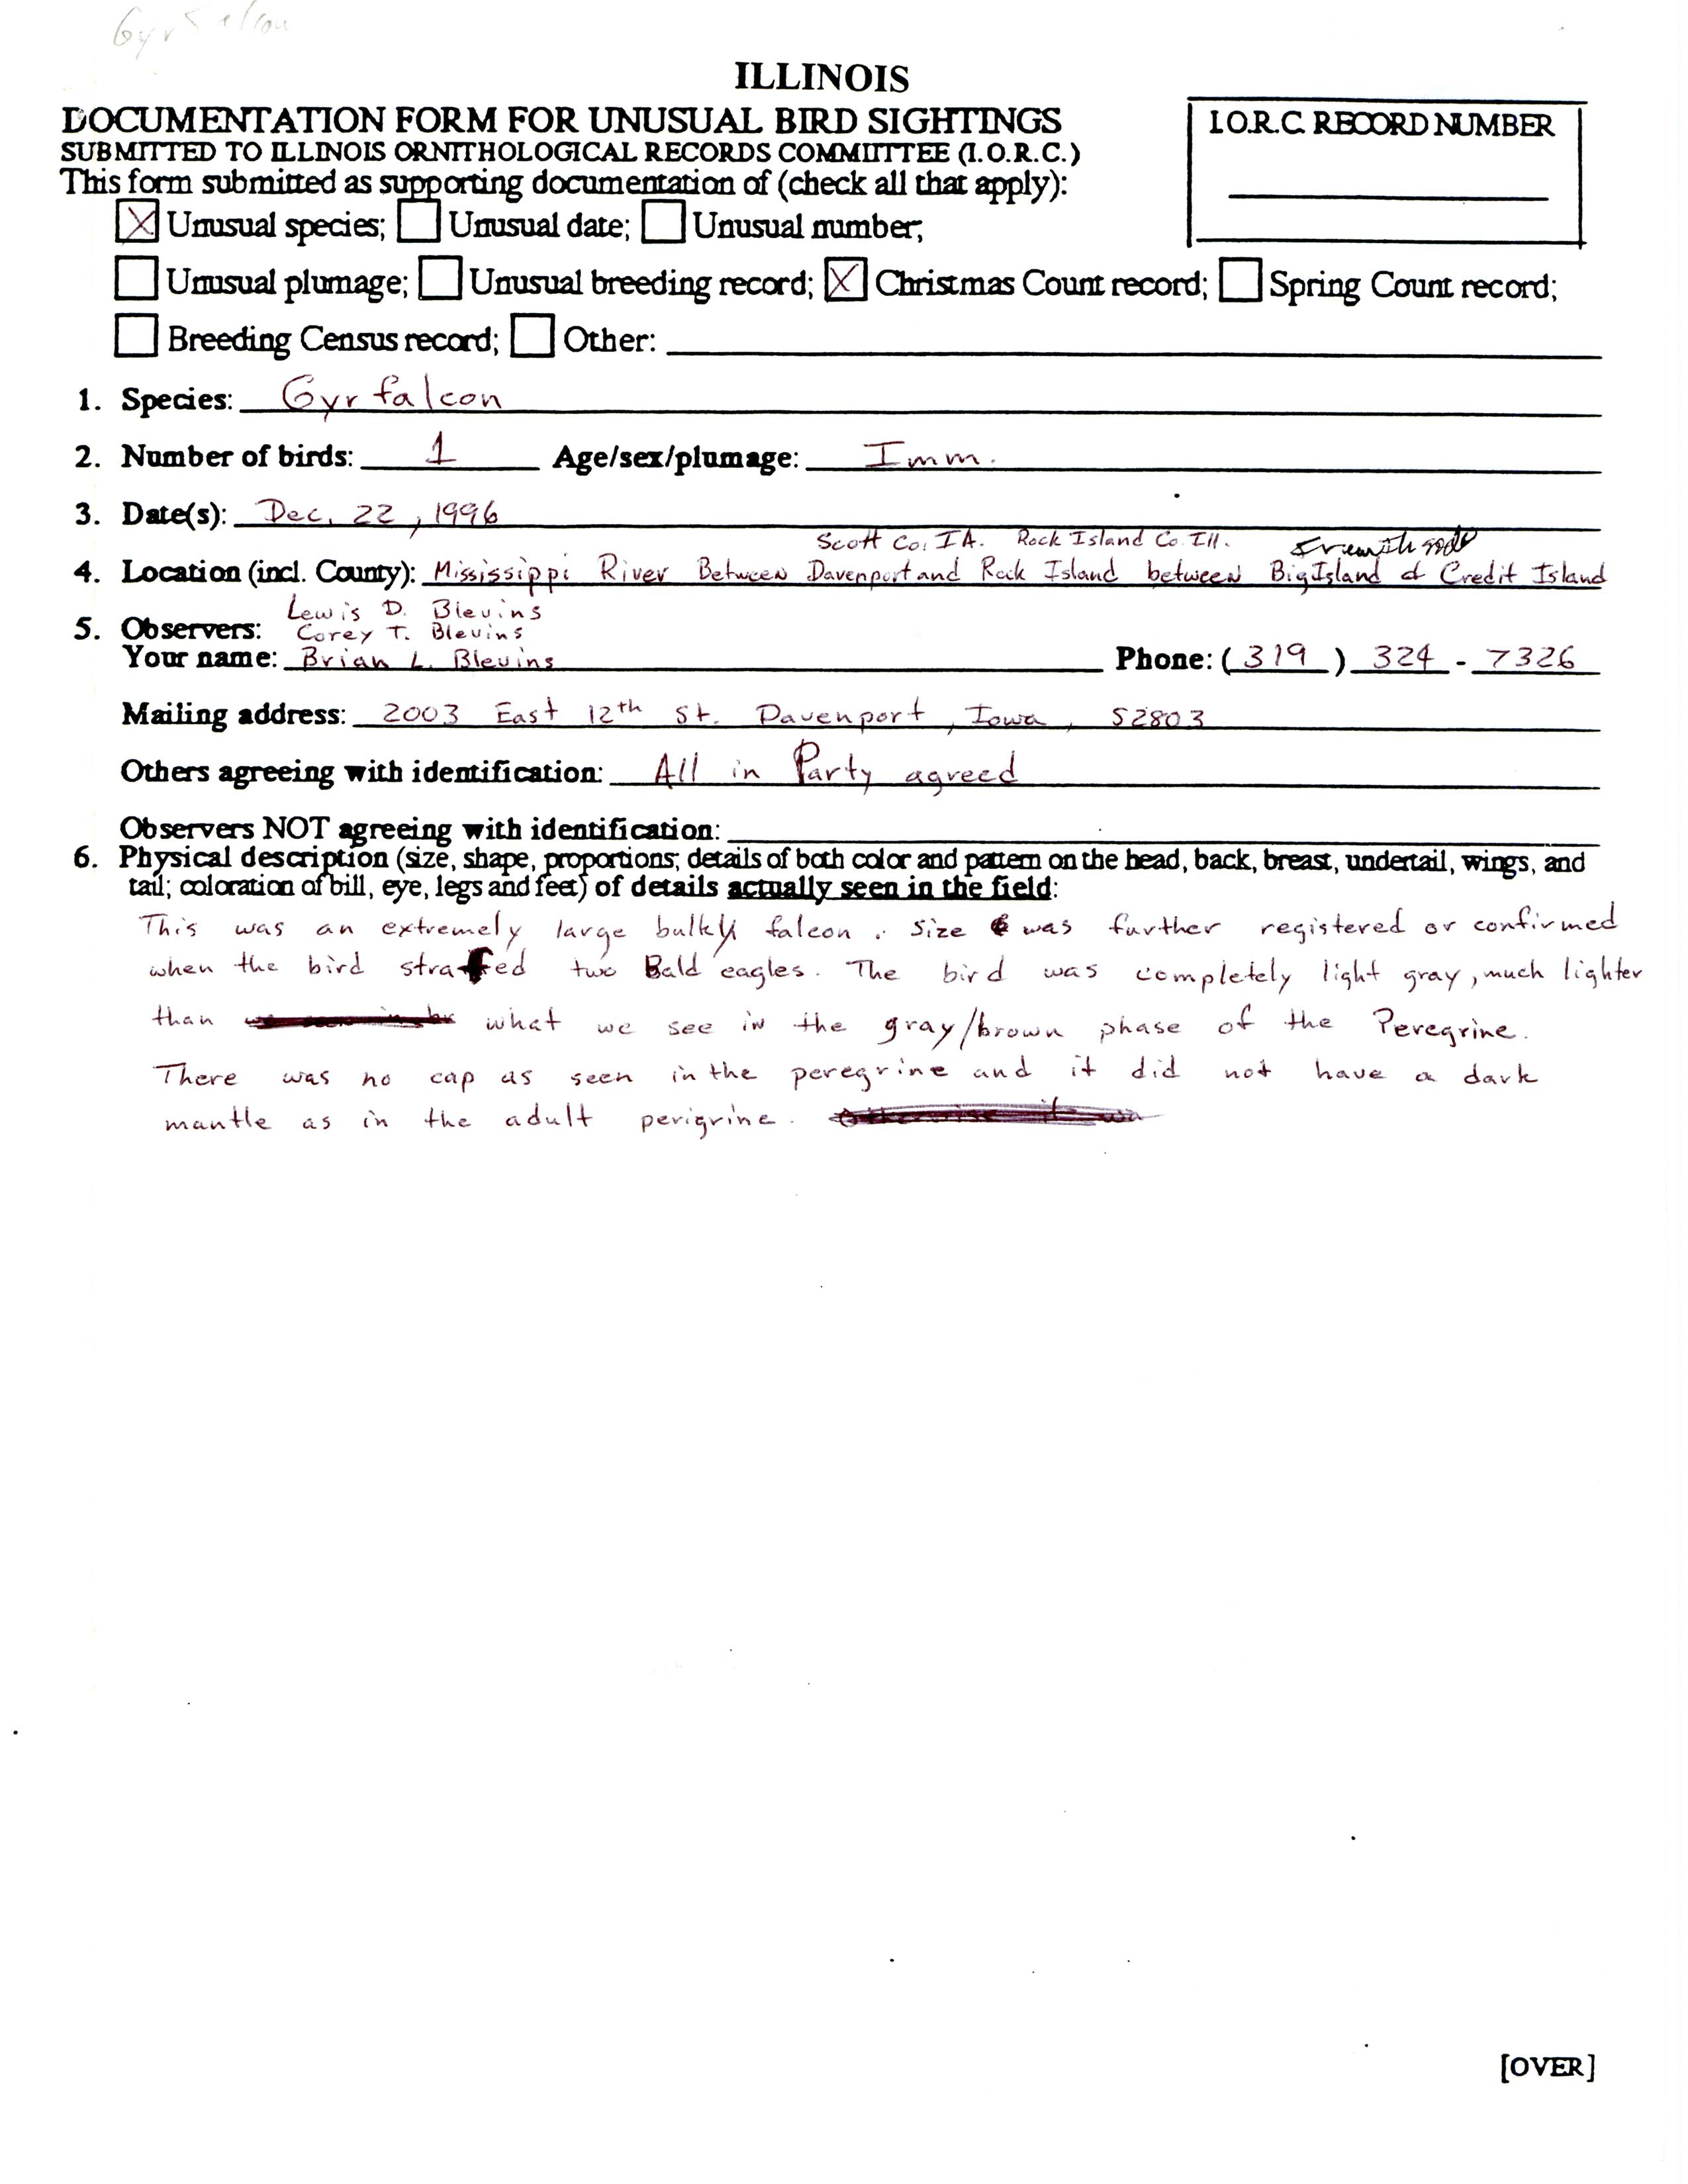 Rare bird documentation form for Gyrfalcon on the Mississippi River between Davenport and Rock Island, IL, 1996